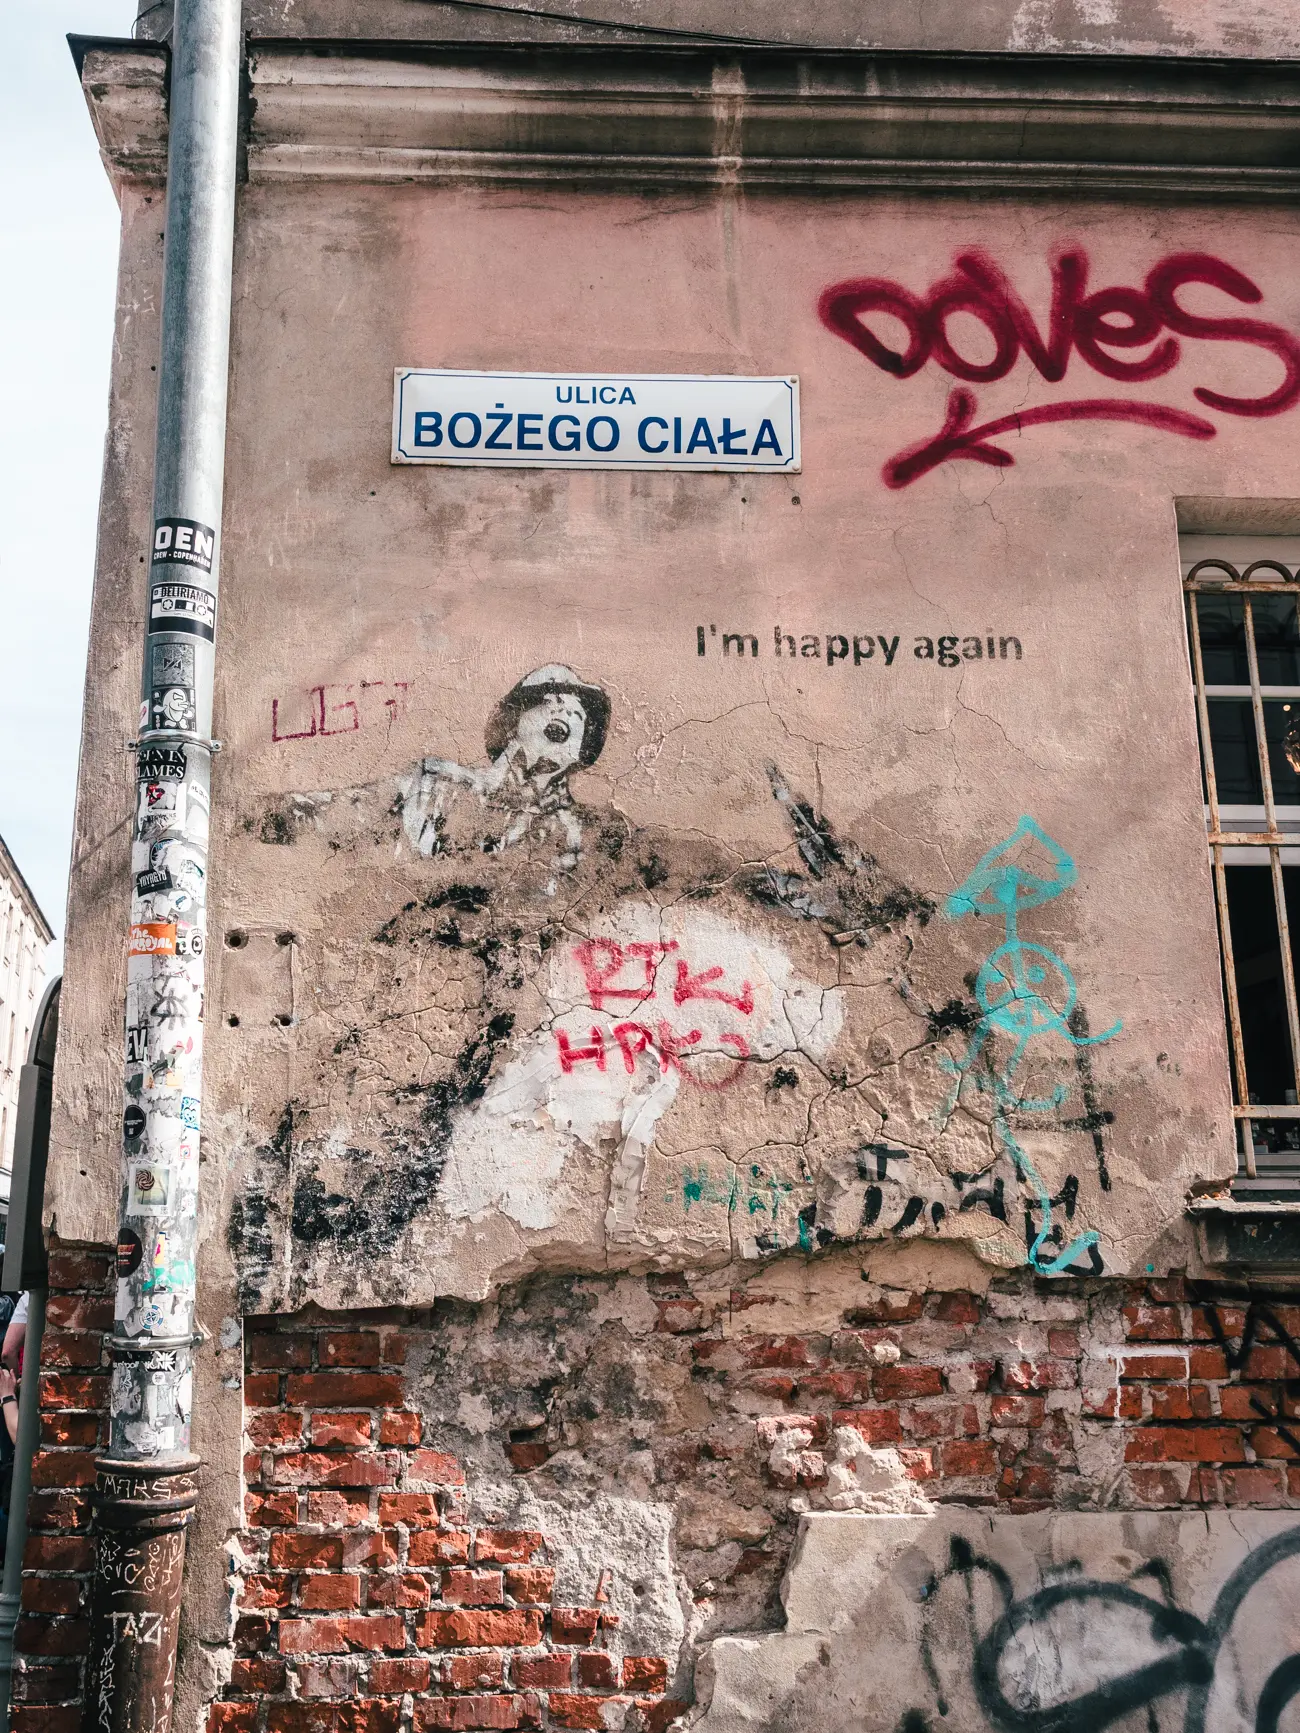 Faded graffiti and mural of a happy man singing while holding on to a street light on a crumbling wall in Kazimierz, Krakow.